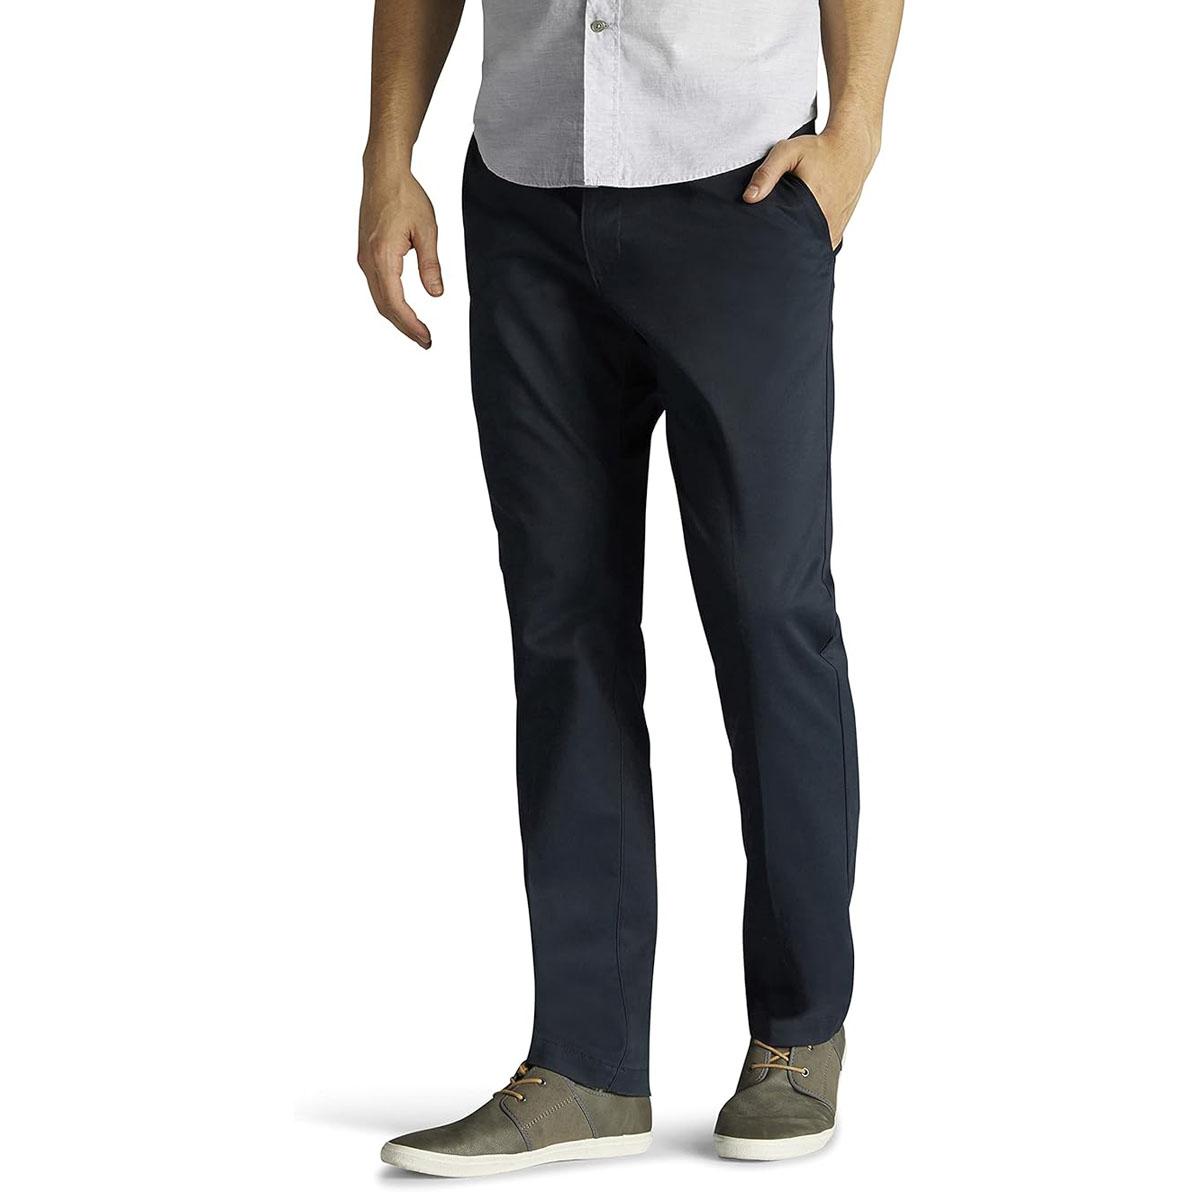 Lee Mens Extreme Motion Flat Front Slim Straight Pants for $17